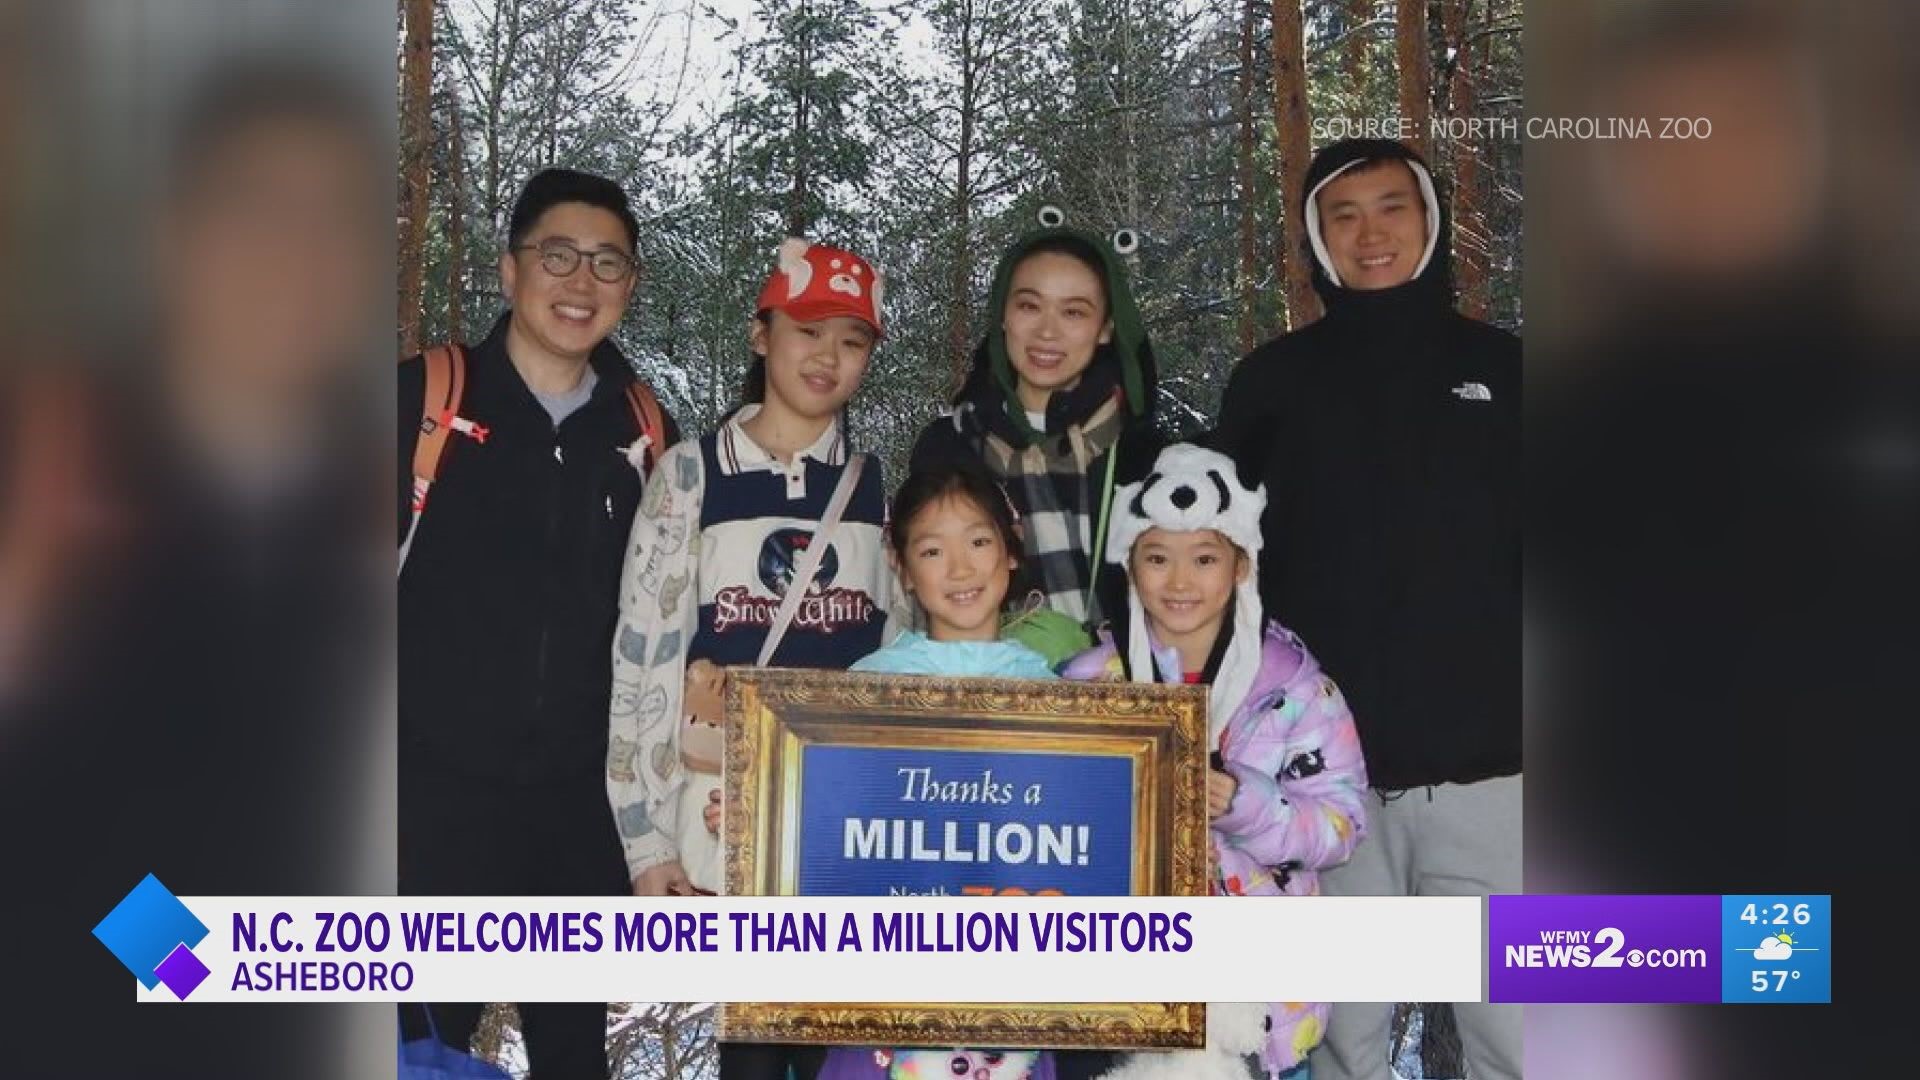 The NC Zoo is celebrating a major milestone with its one-millionth visitor.